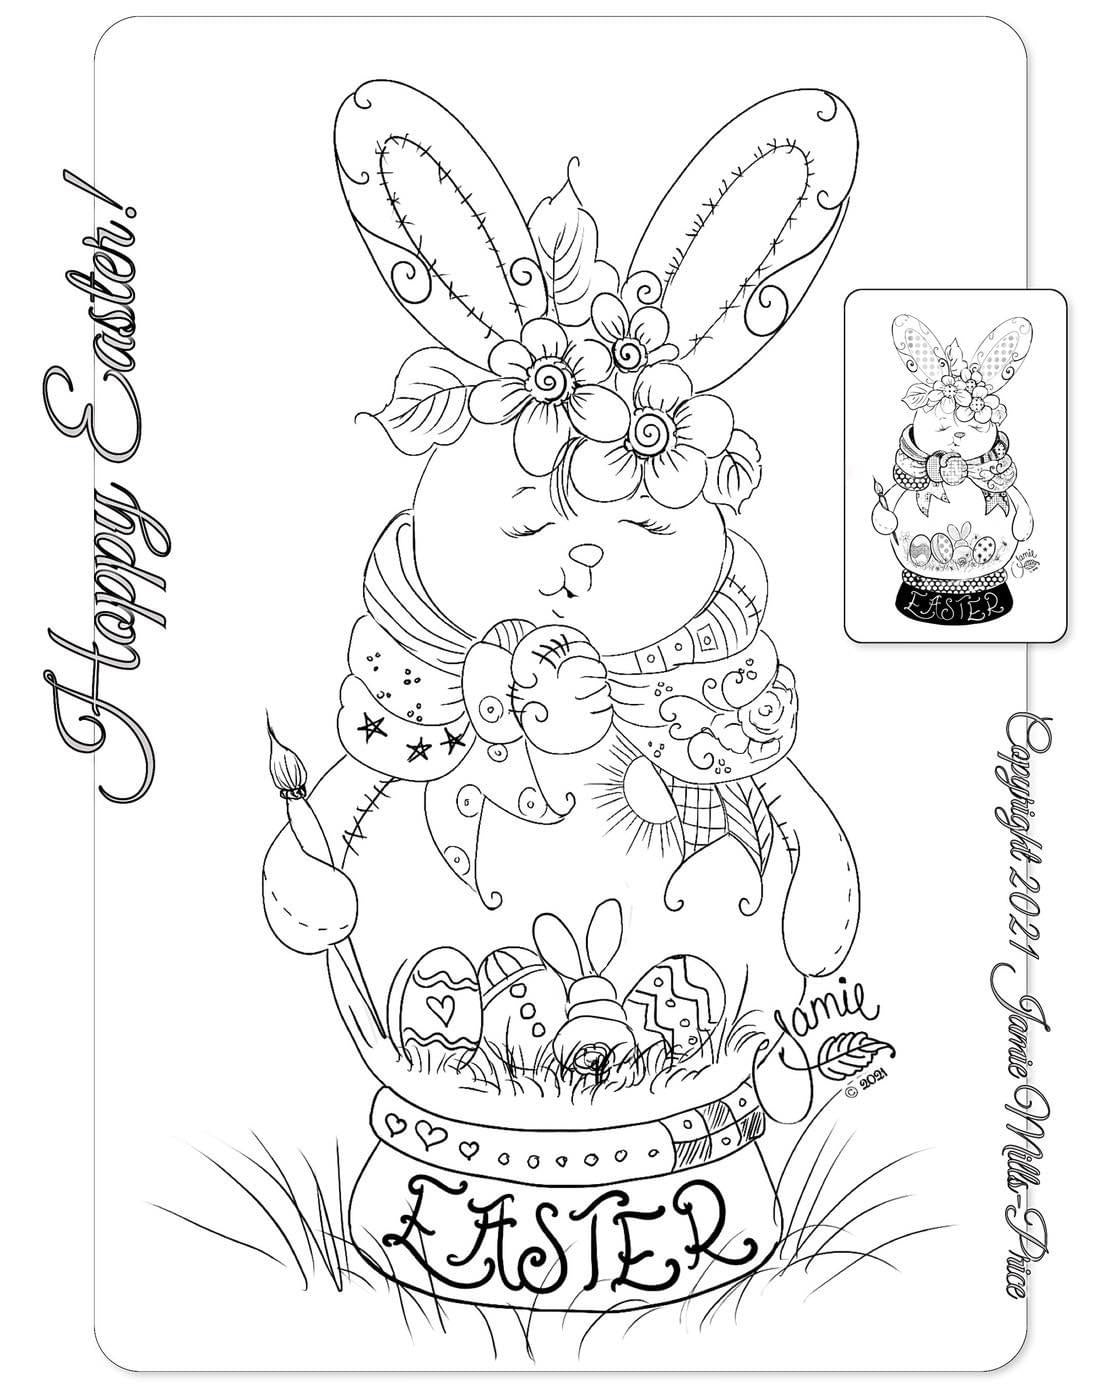 Easter wishes DESIGN JAMIE MILLS PRICE SUNDAY-FUNDAY Out of the Wood